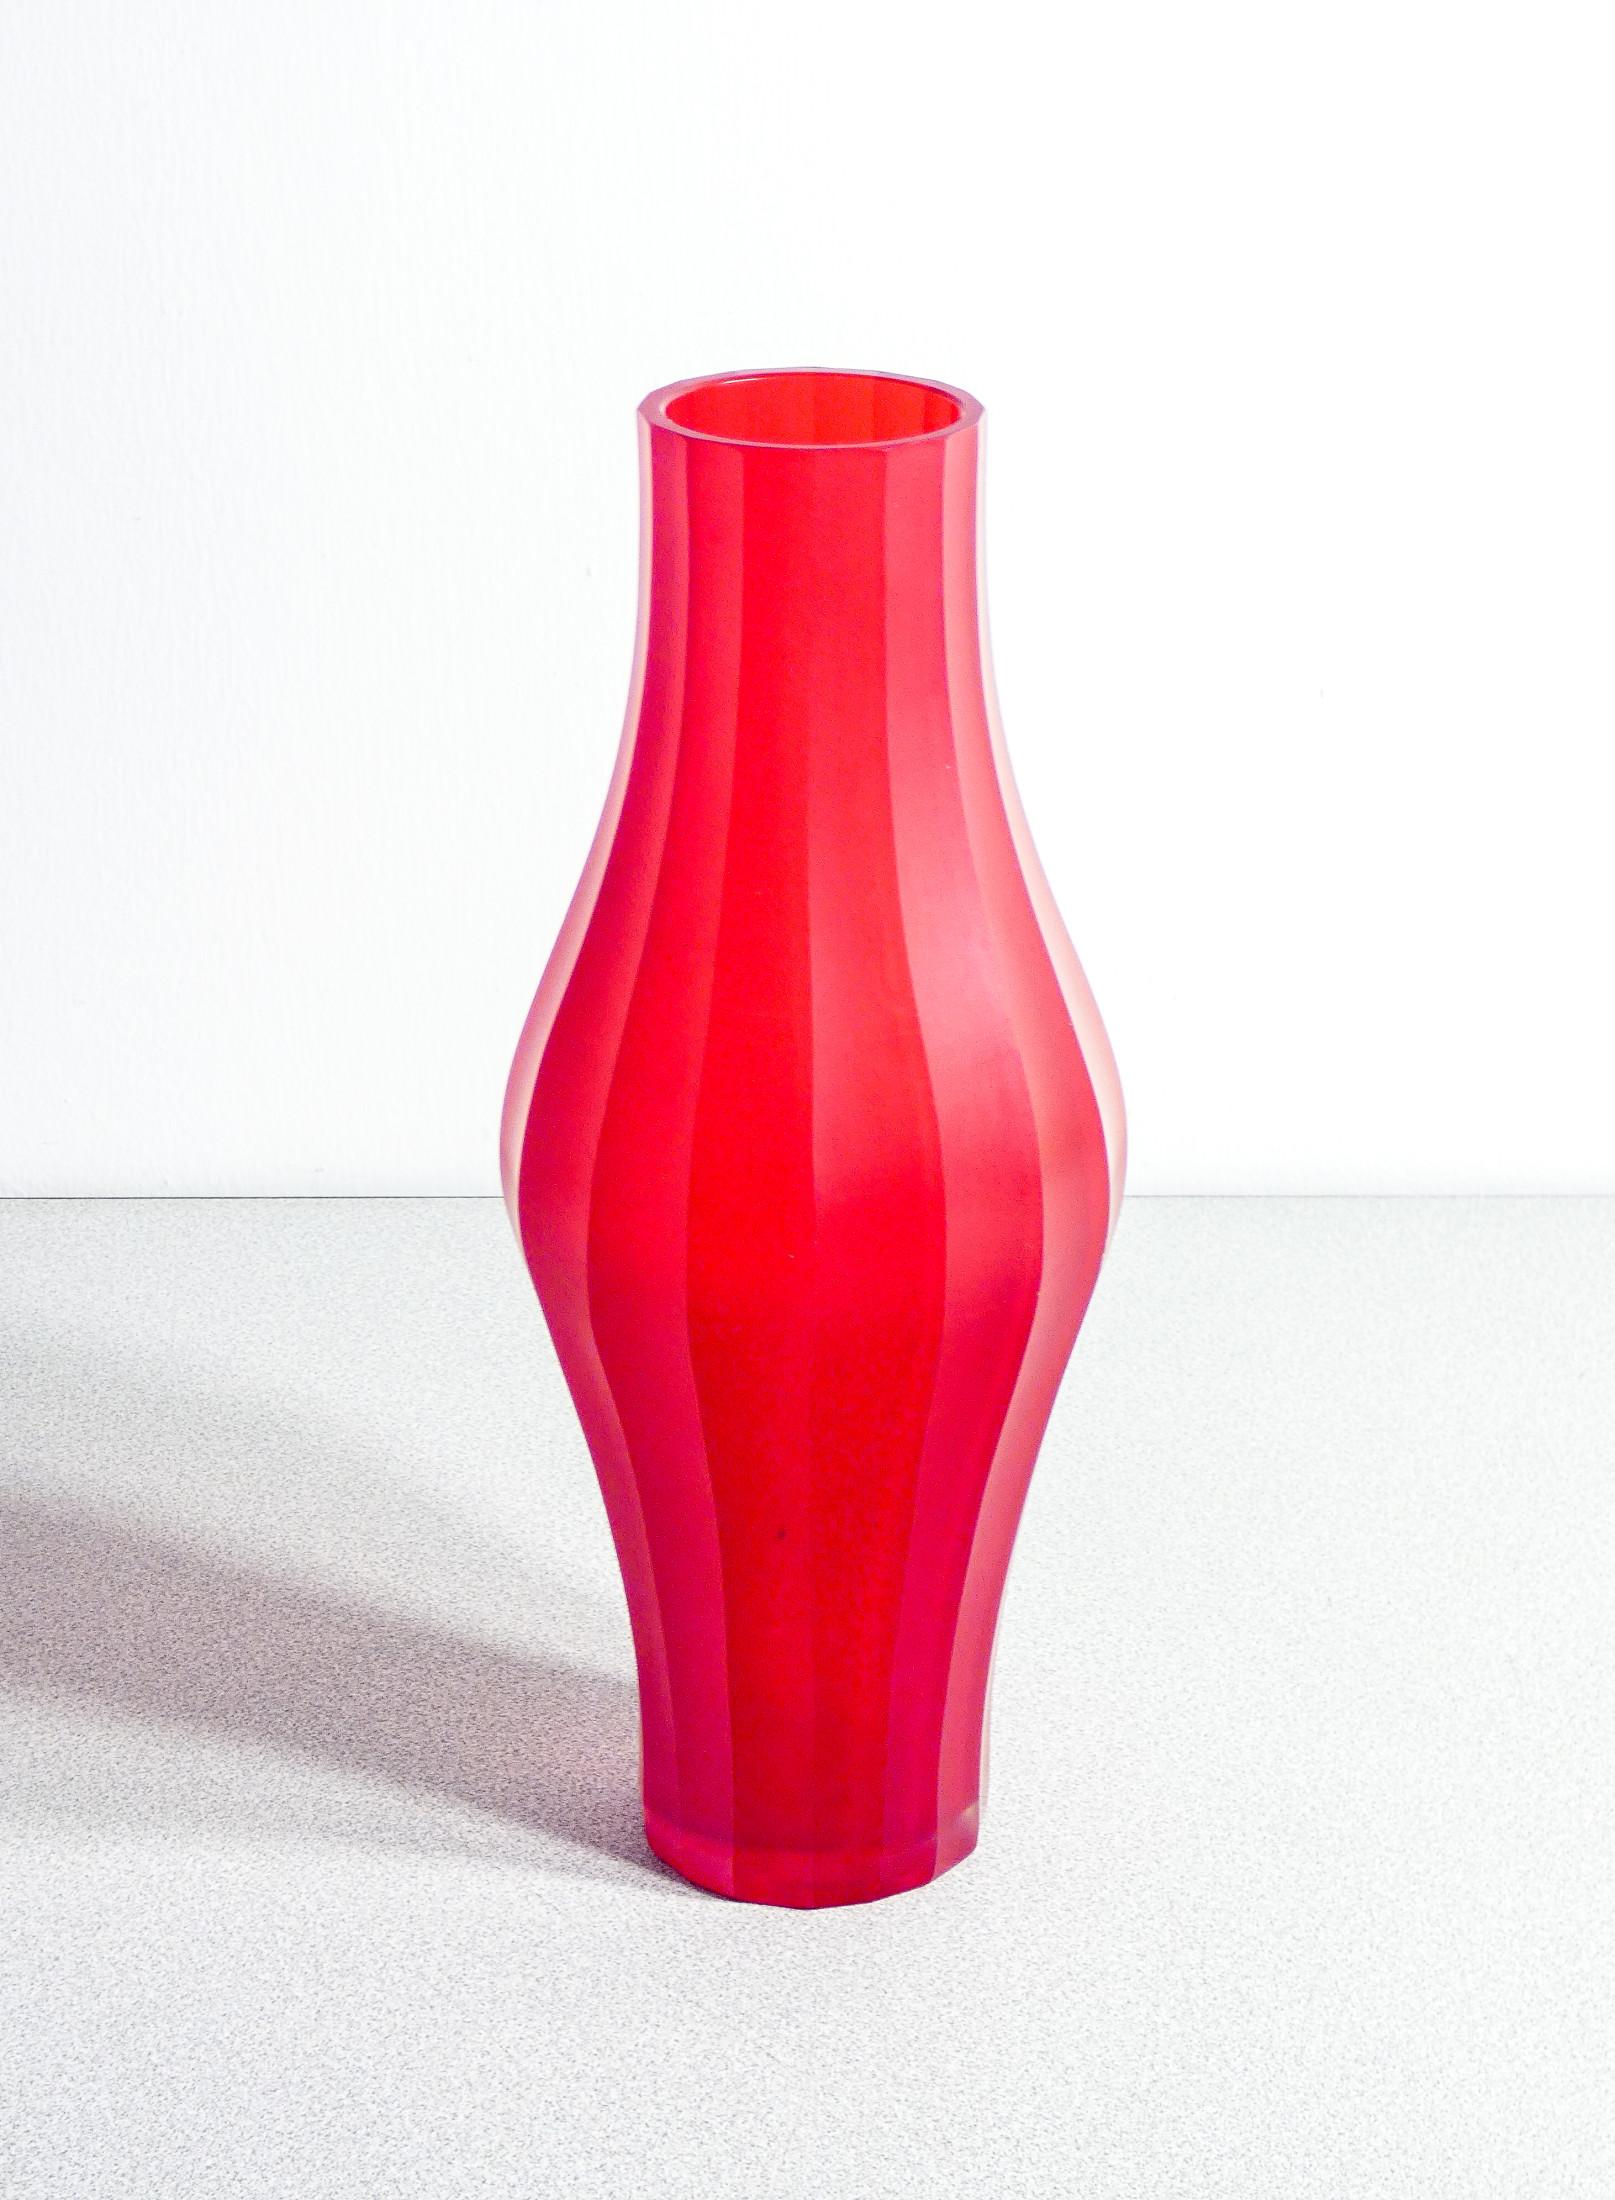 Blown glass vase
murano red.

ORIGIN
Italy

PERIOD
Anni 80

MATERIALS
Red blown glass

DIMENSIONS
H 34 cm
Ø 13 cm

CONDITIONS
Excellent. Very slight and negligible traces of time. Evaluate through the attached photos.

SHIPPING
Free shipping in